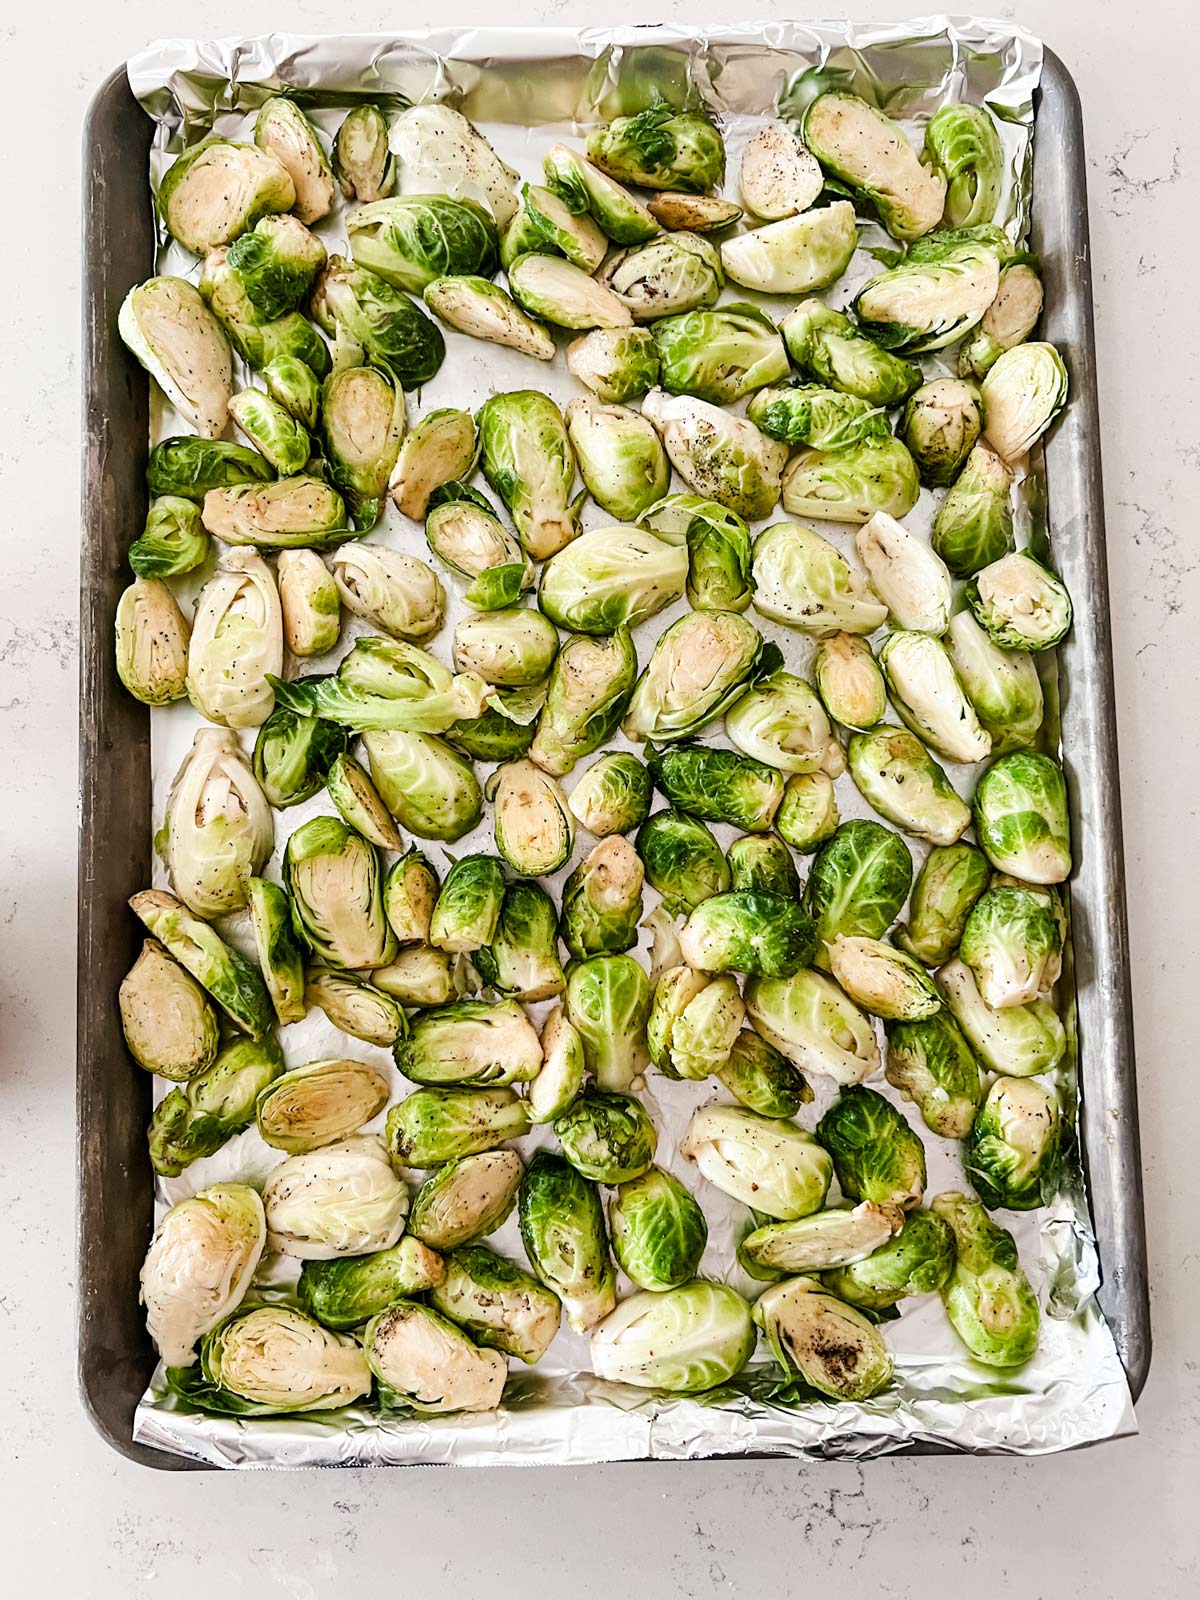 Photo of a foil lined baking sheet with seasoned Brussels sprouts.